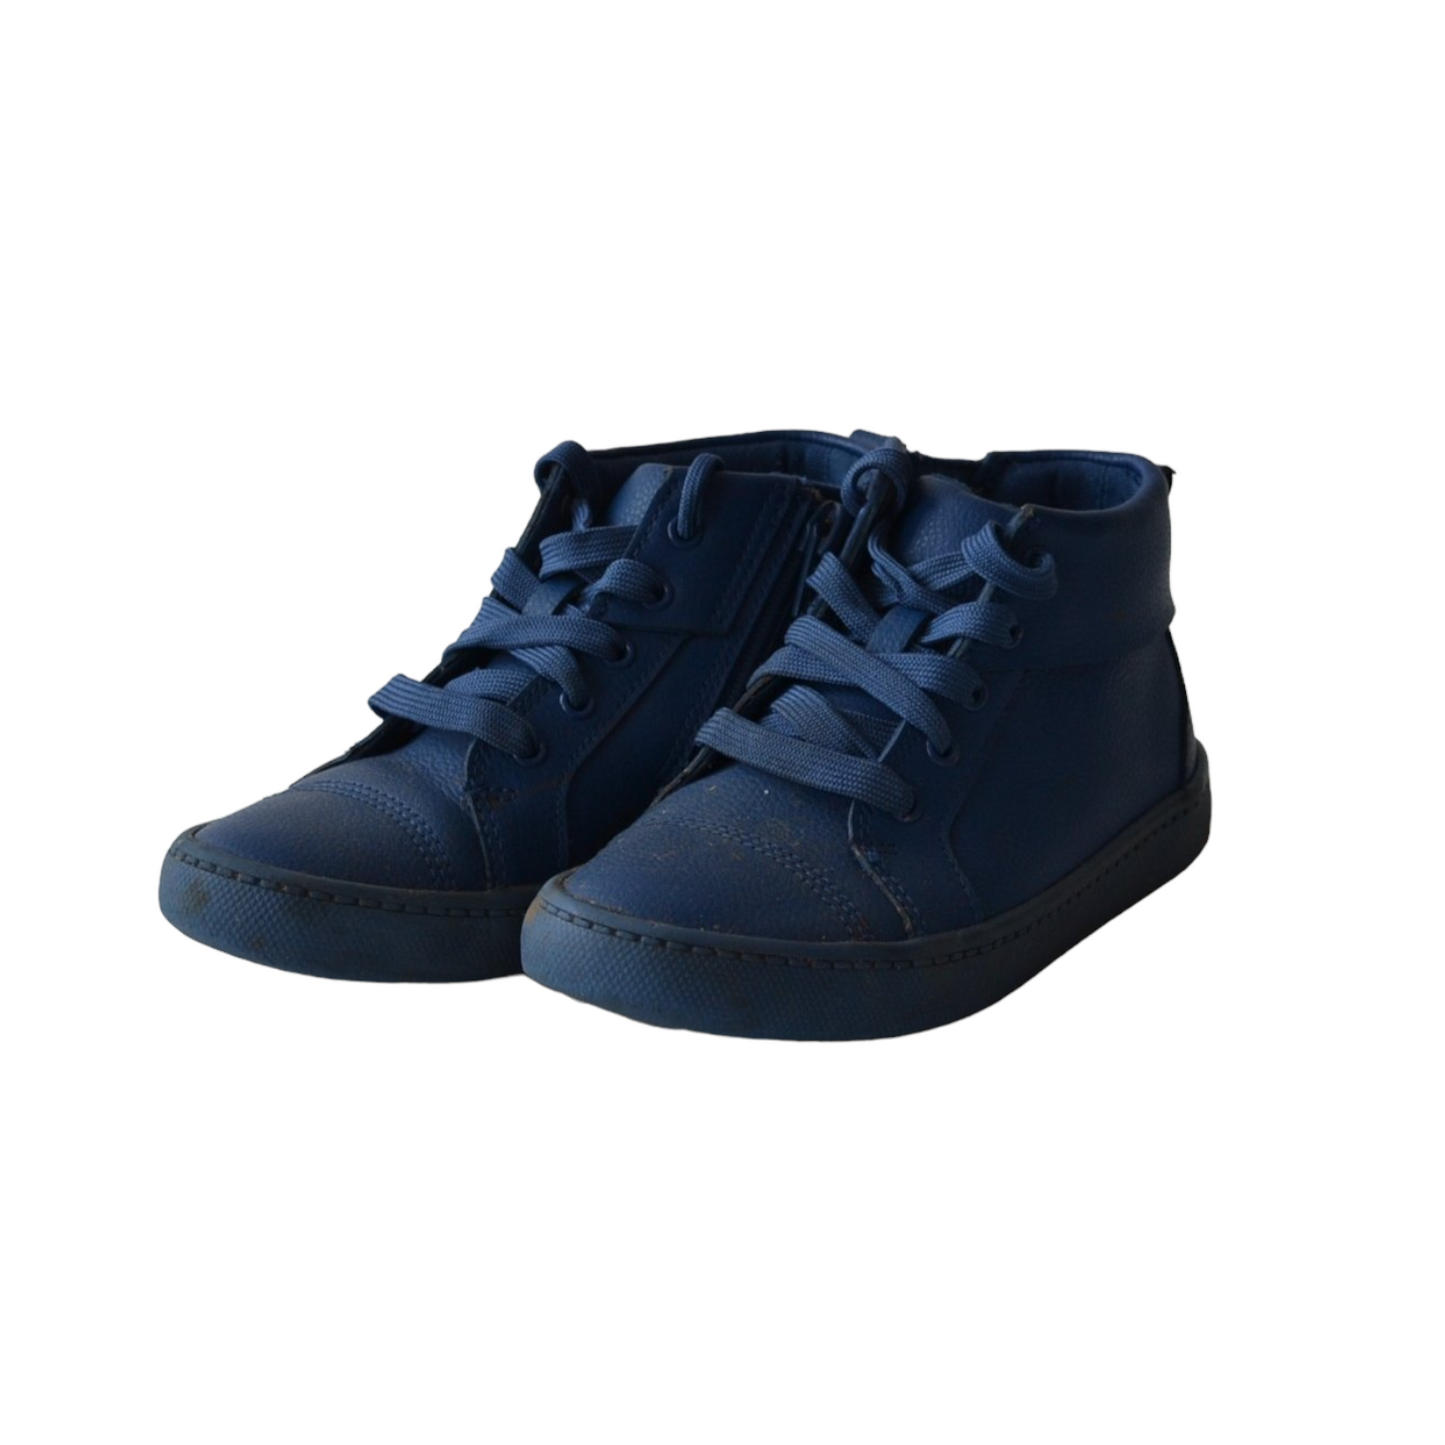 Clarks Navy Blue Leather Style High Tops Trainers Shoe Size 10.5 (jr)